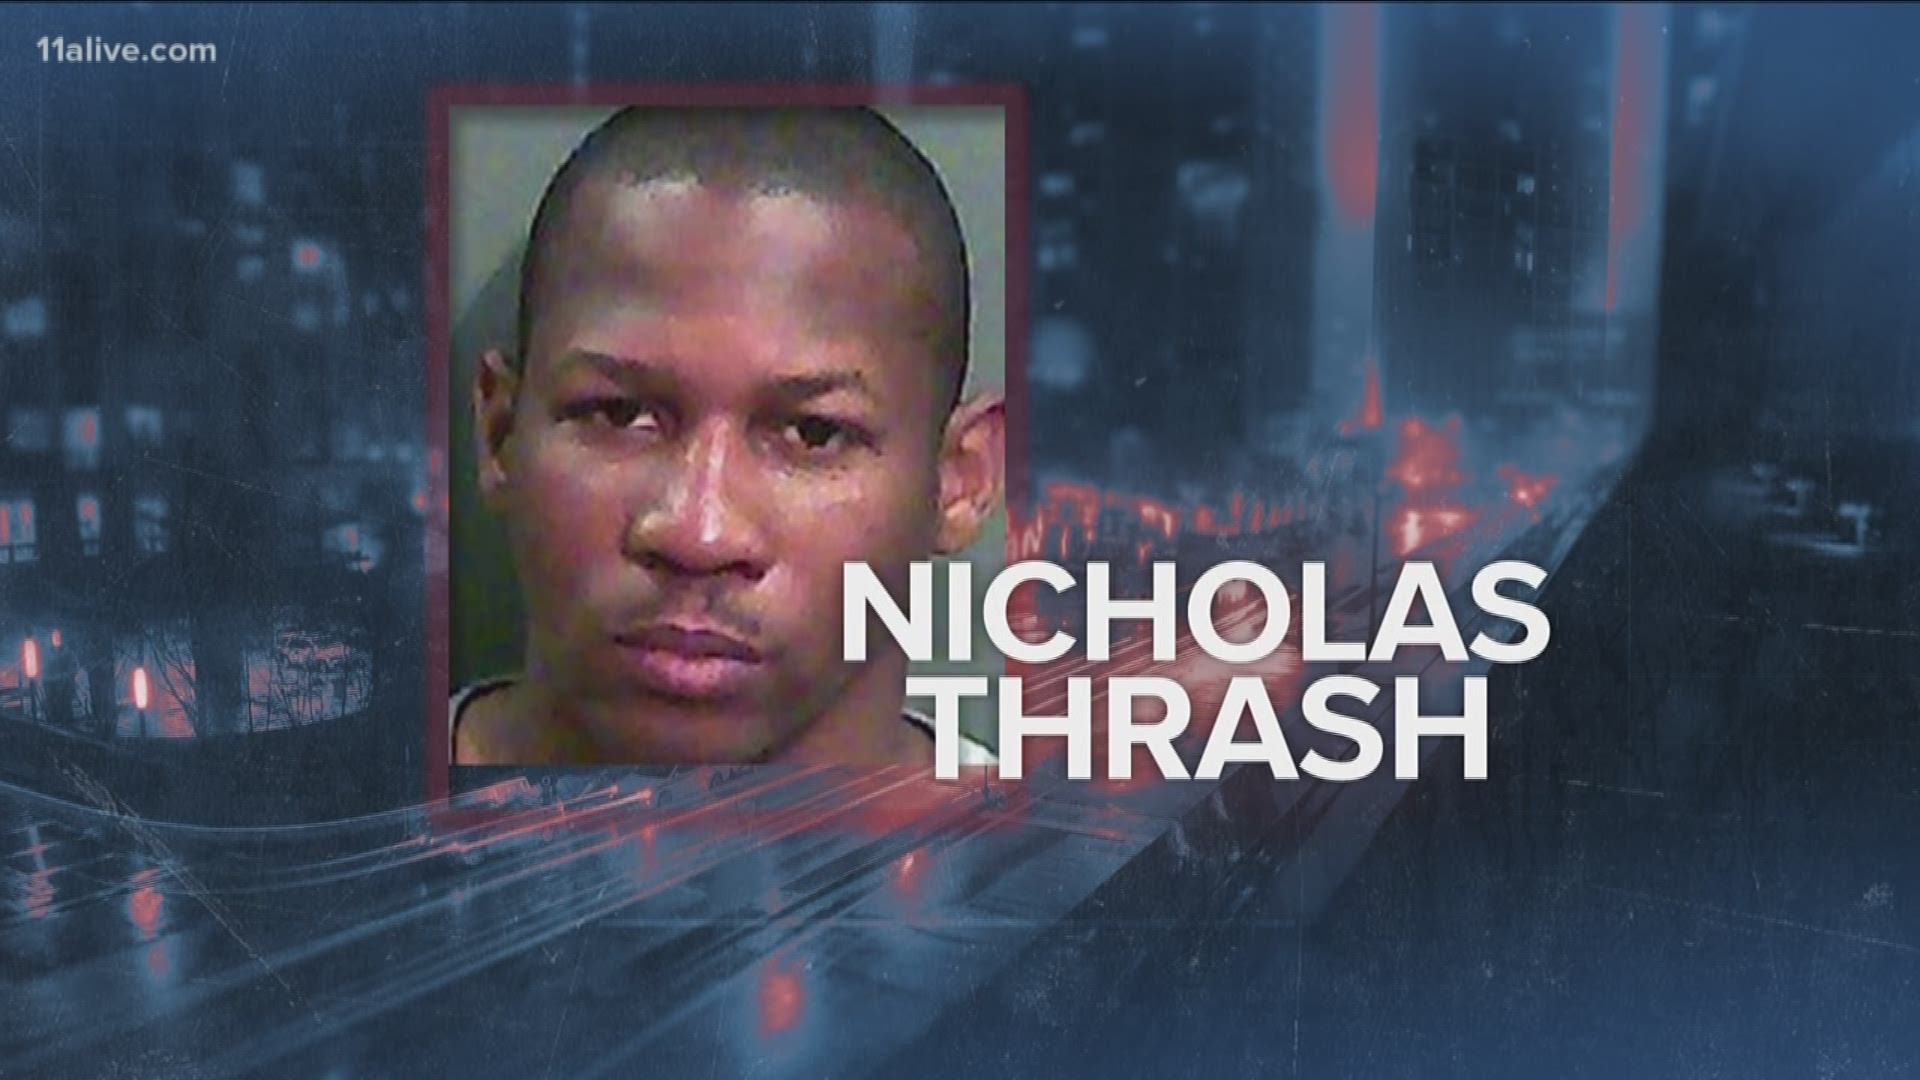 Nicholas Thrash received his sentence in an Indiana court after being convicted on multiple counts of child molestation.